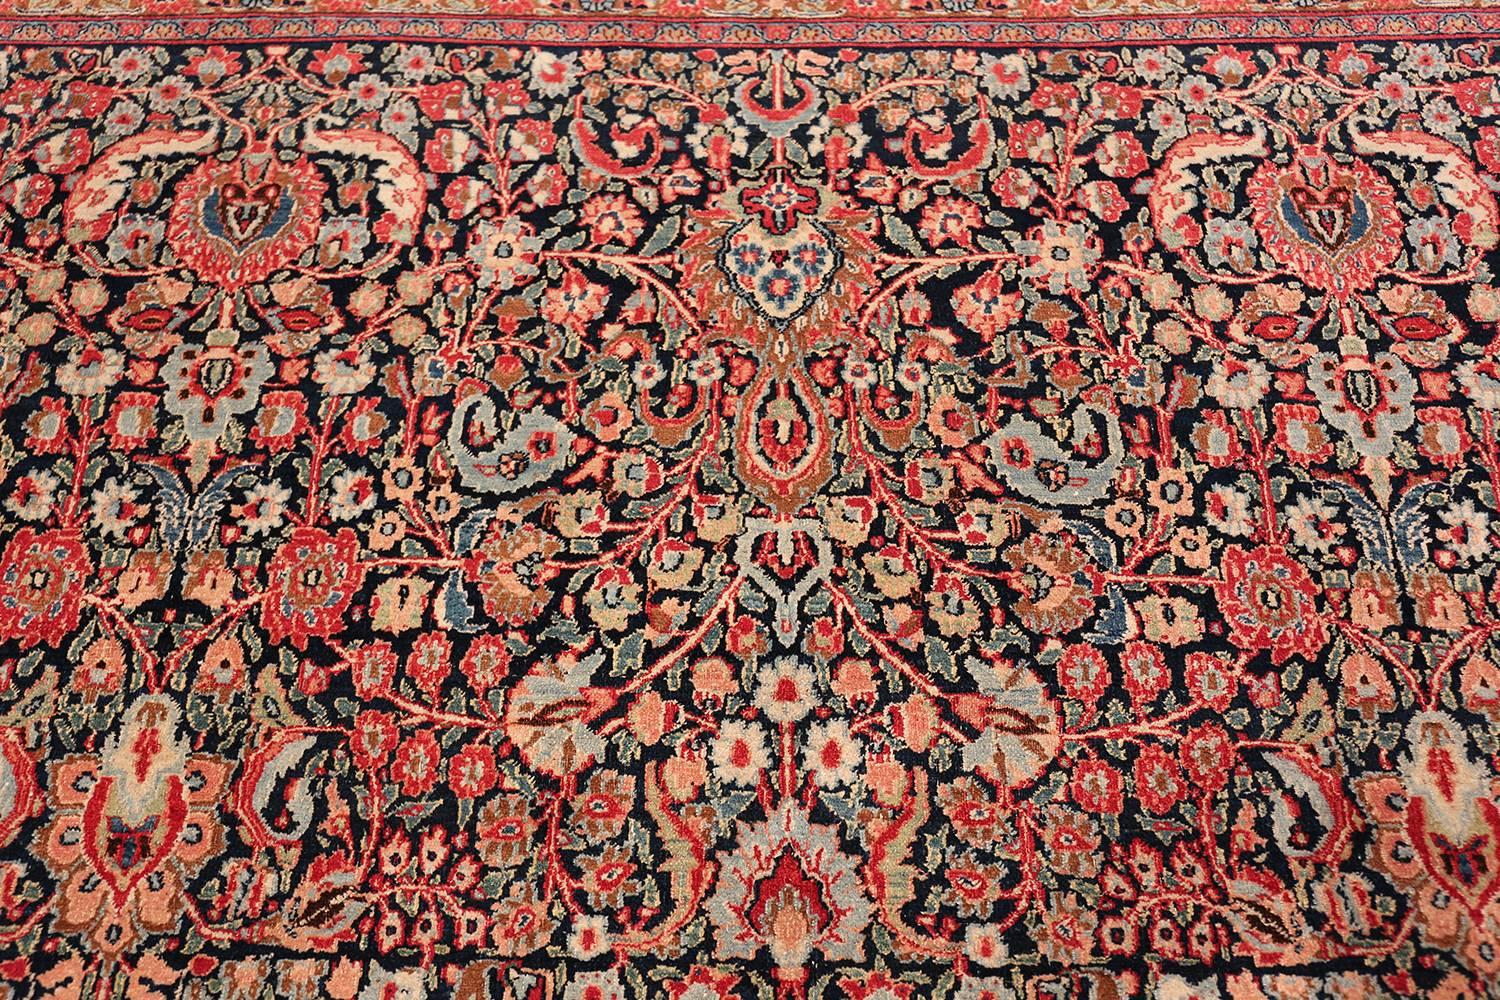 Beautifully Intricate Large Size Floral Design Antique Persian Khorassan Rug, Country of Origin / Rug Type: Persian Rug, Circa Date: 1920. Size: 13 ft 3 in x 19 ft 2 in (4.04 m x 5.84 m).